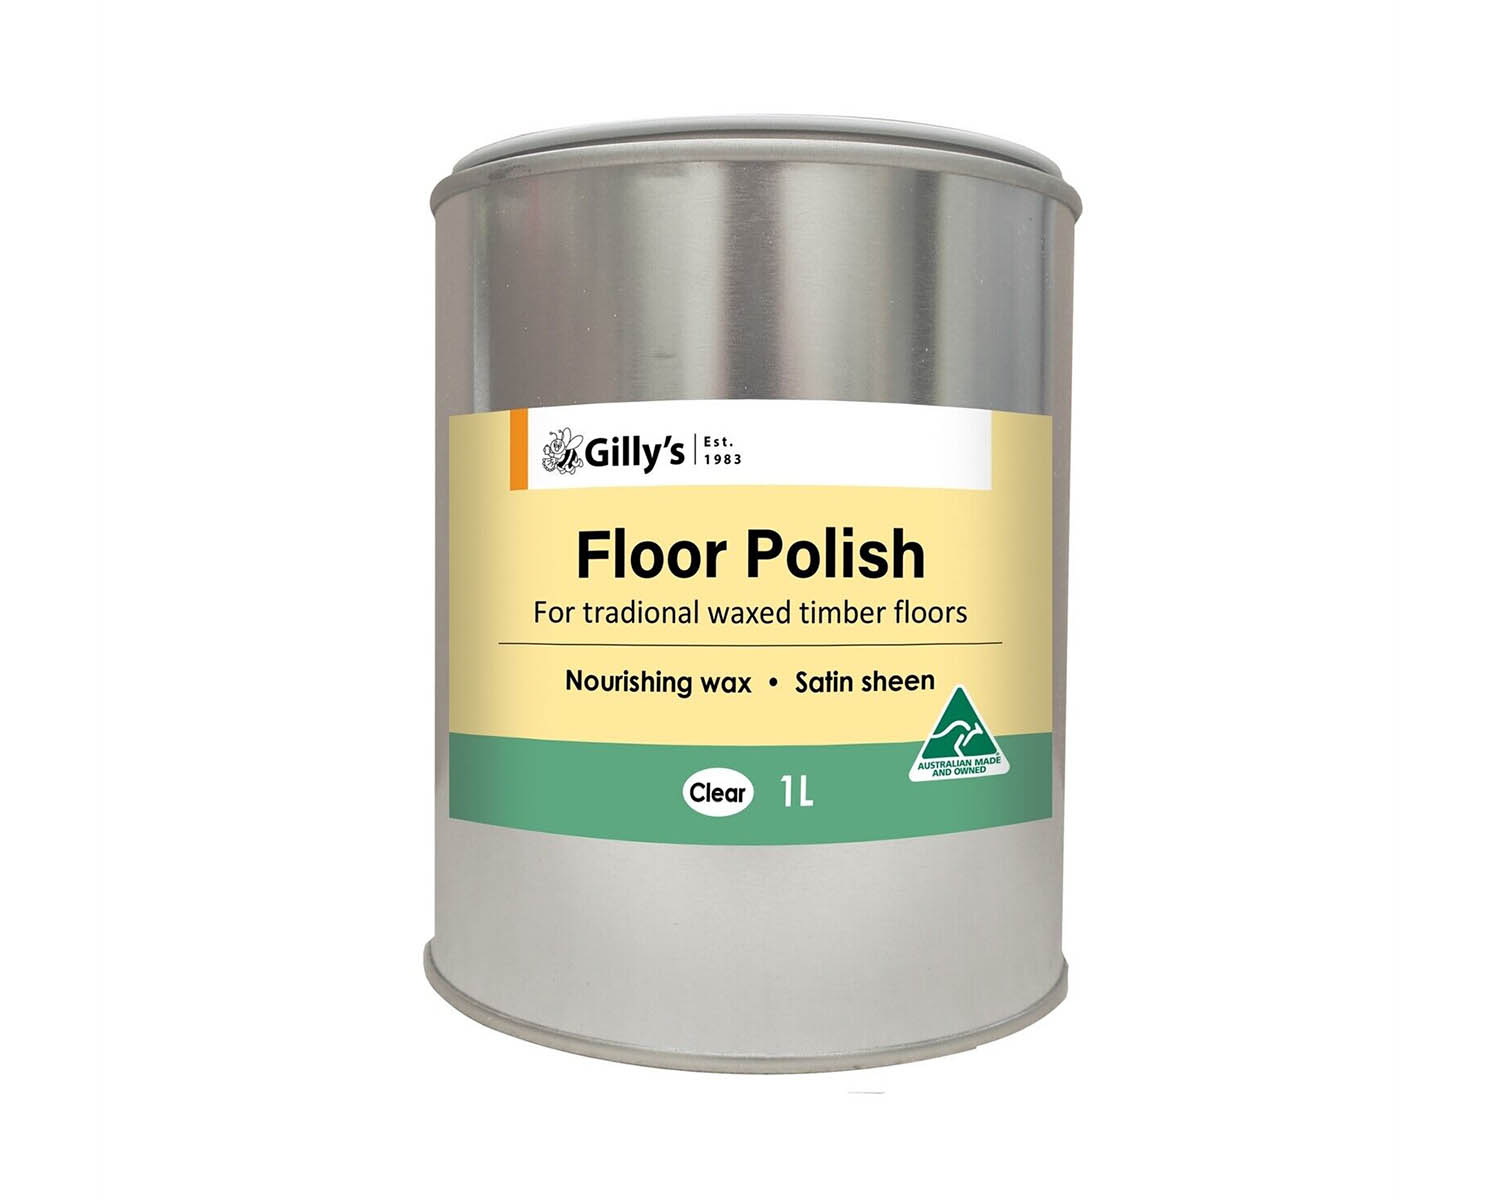 Gilly's Floor Polish, Clear Wax for Pale Wood - one litre can